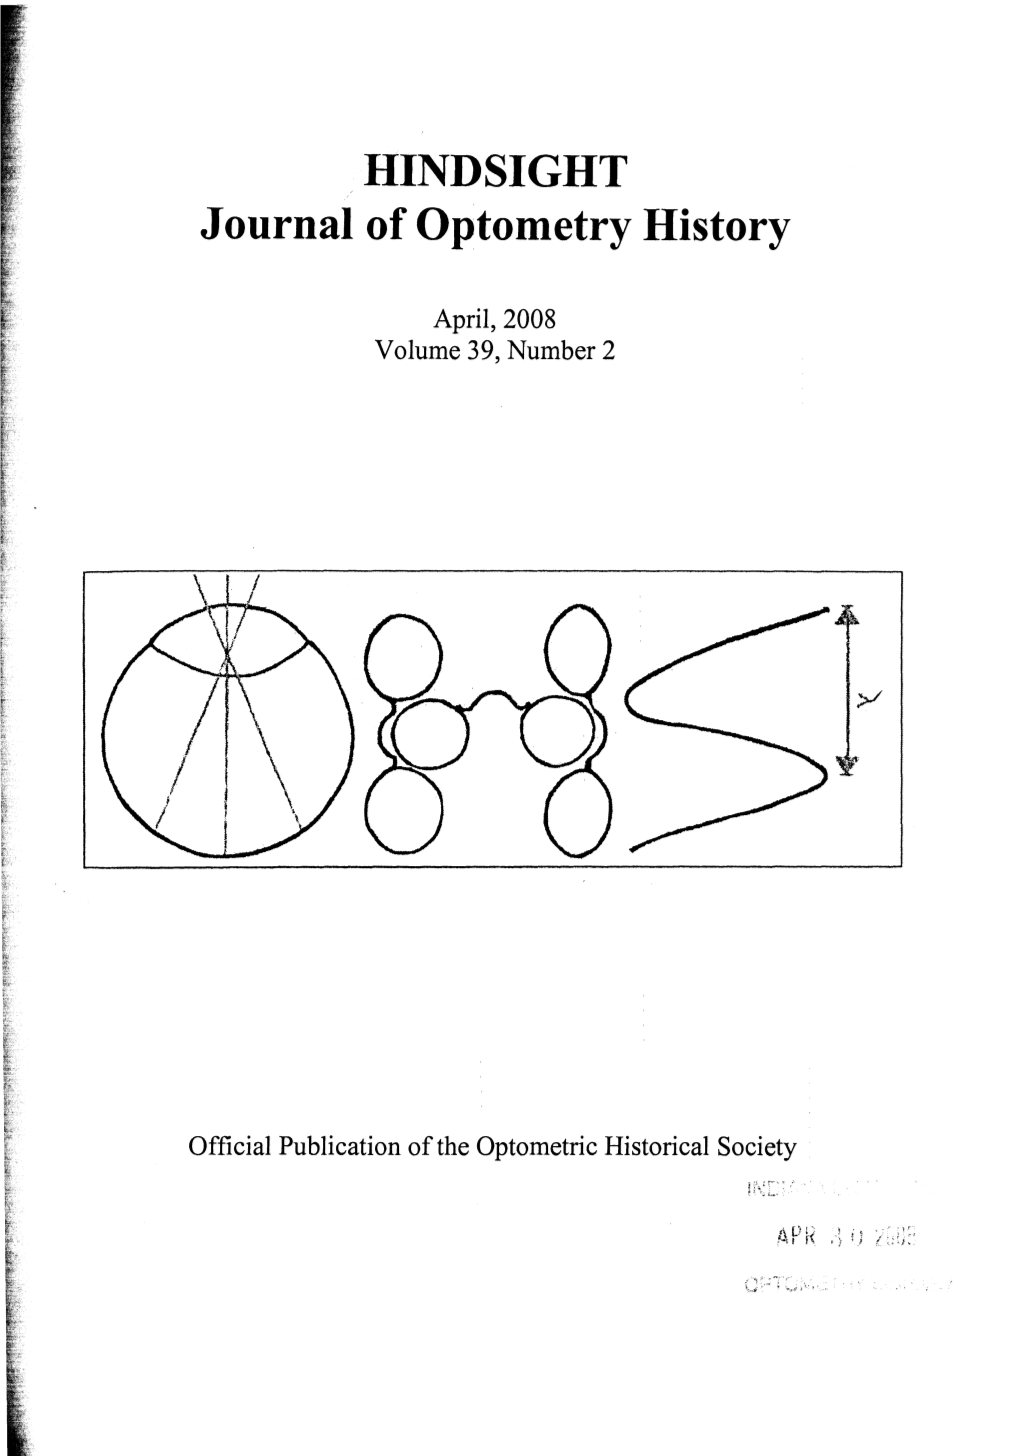 HINDSIGHT Journal of Optometry History